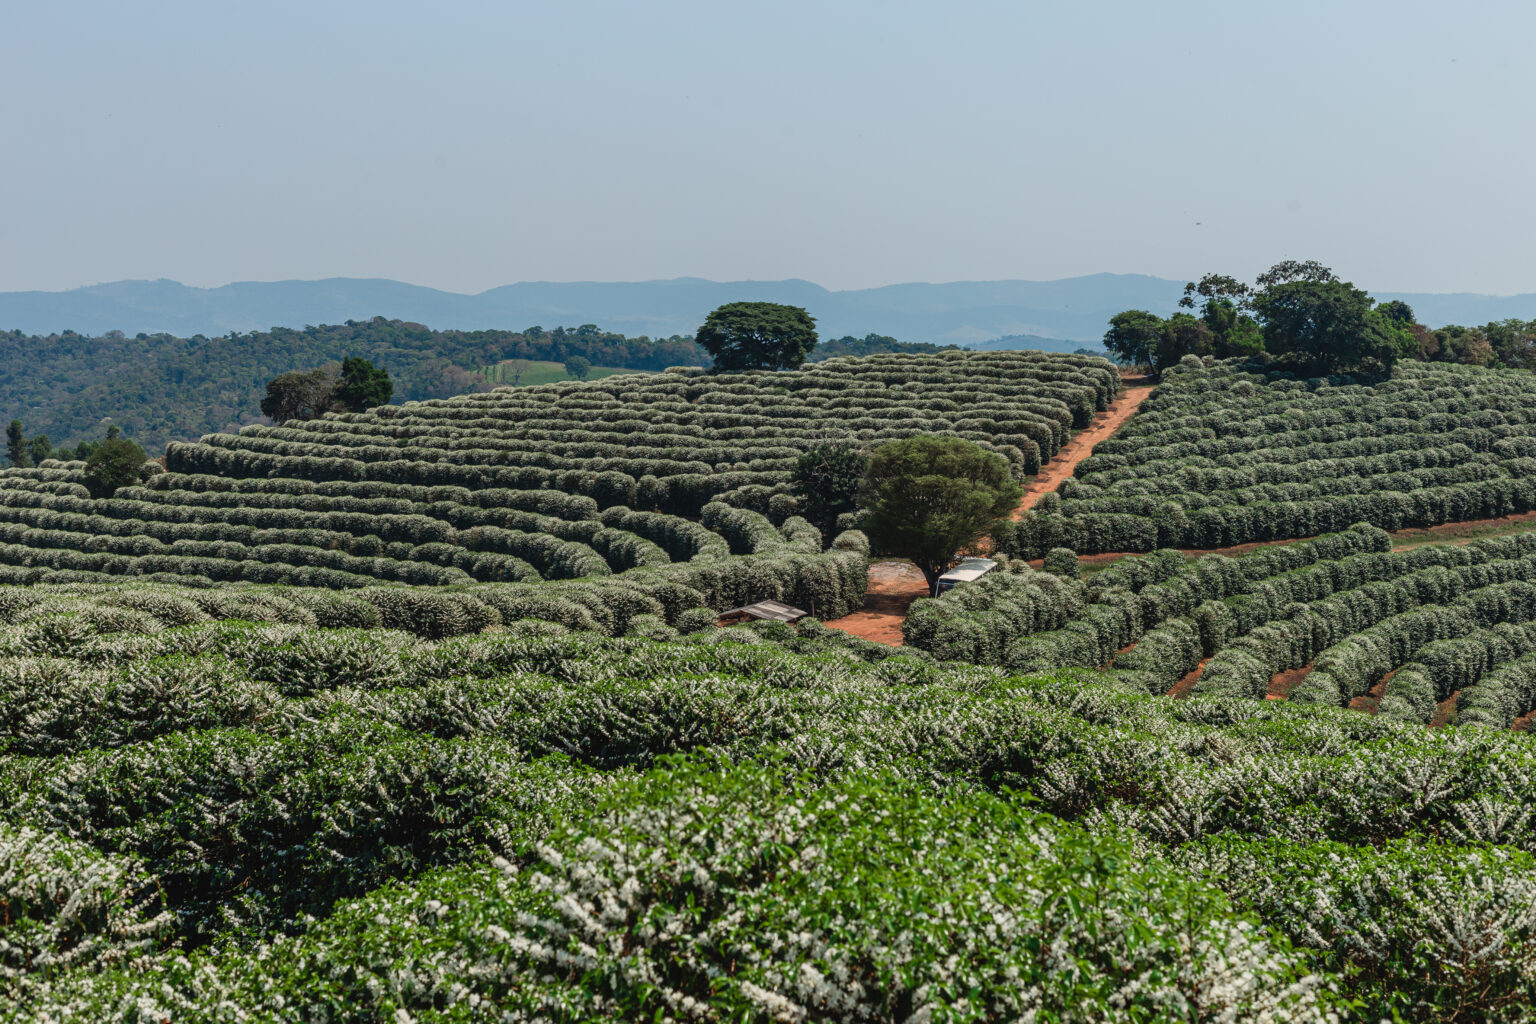 Rows of coffee trees planted in the Carmo de Minas region of Brazil